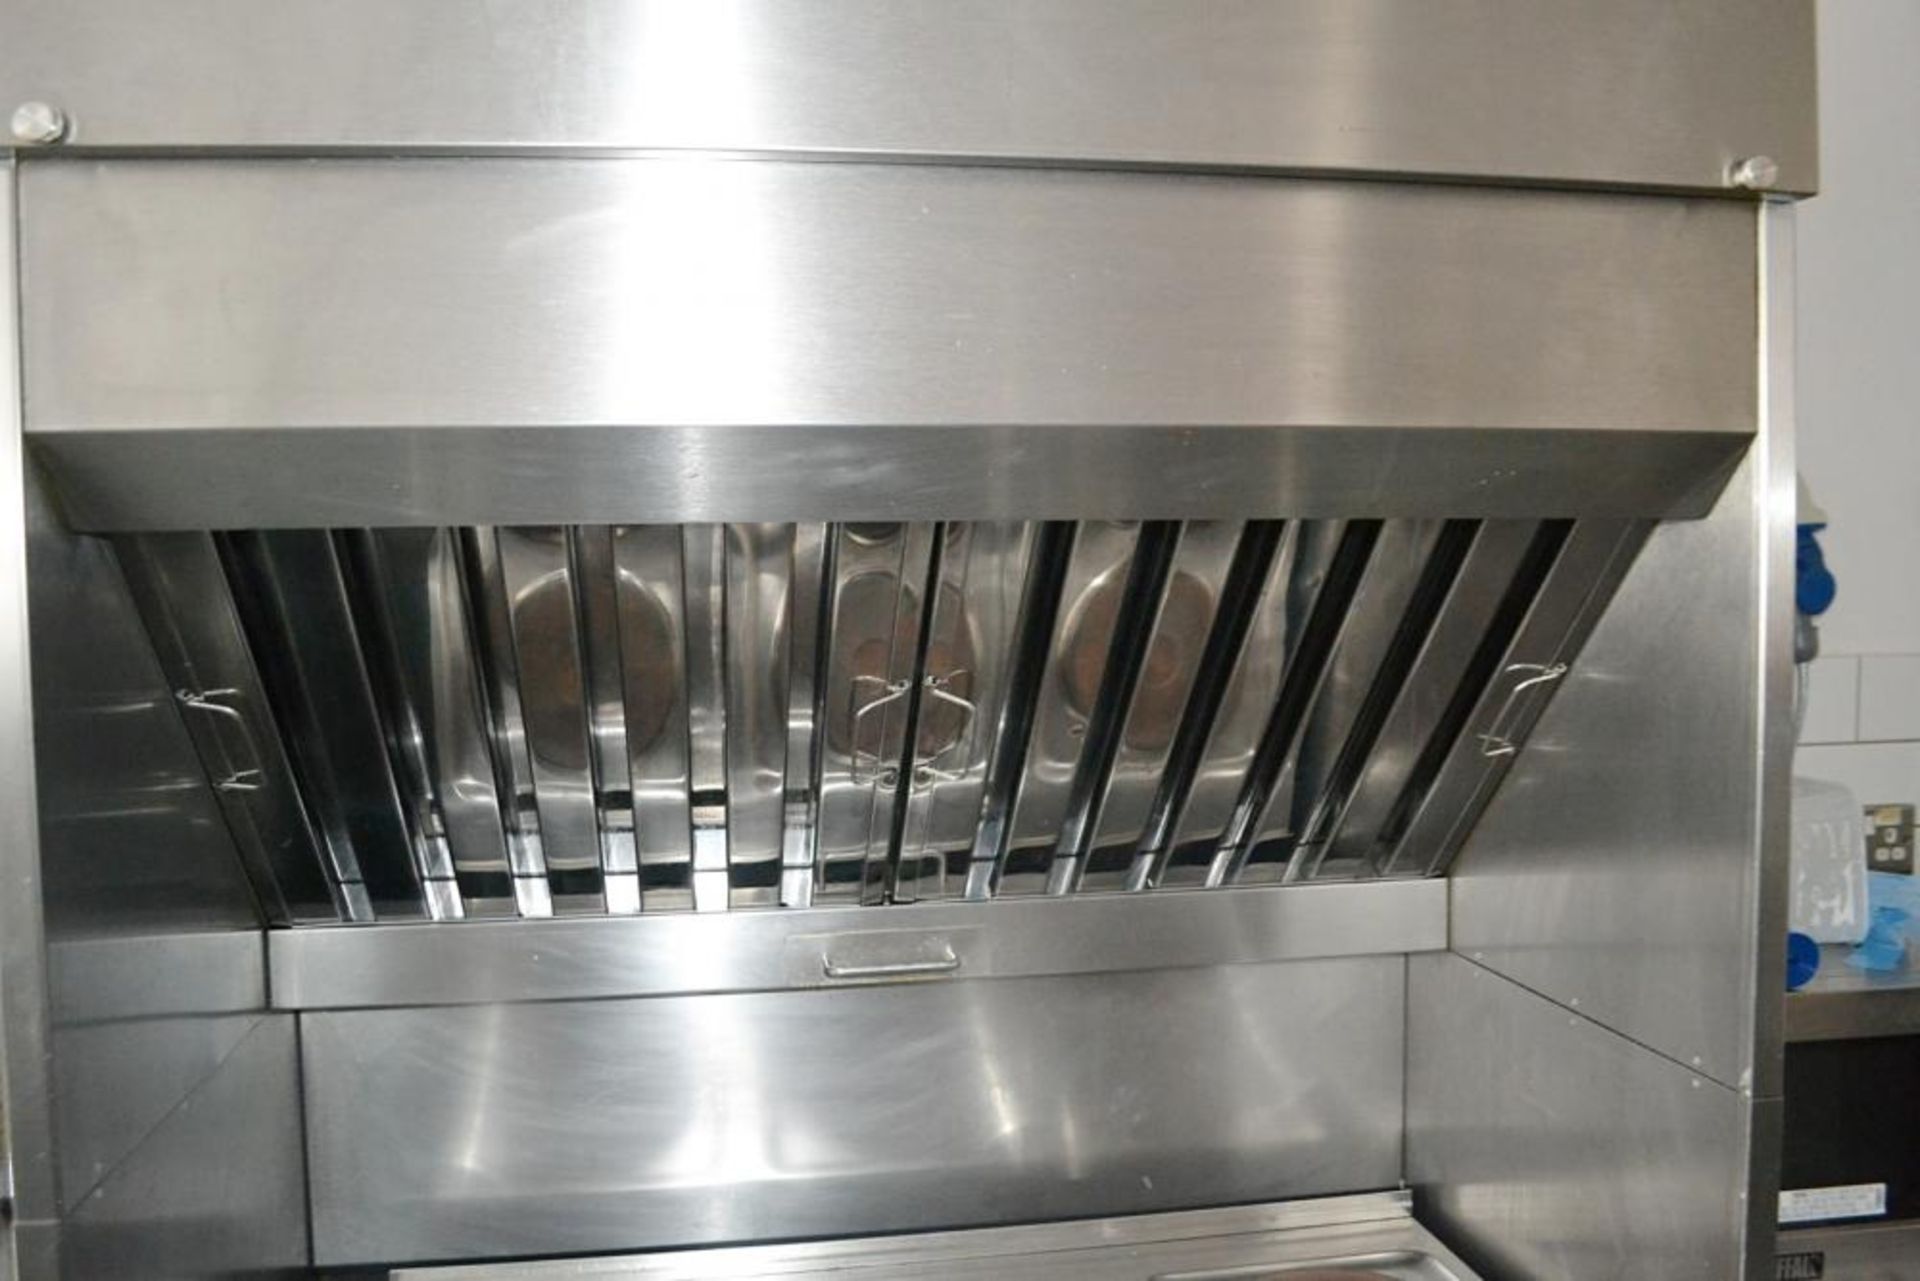 1 x Lincat Silverlink 6 Plate Commercial Electric Burner and Extraction Unit - CL425 - Location: Alt - Image 13 of 16